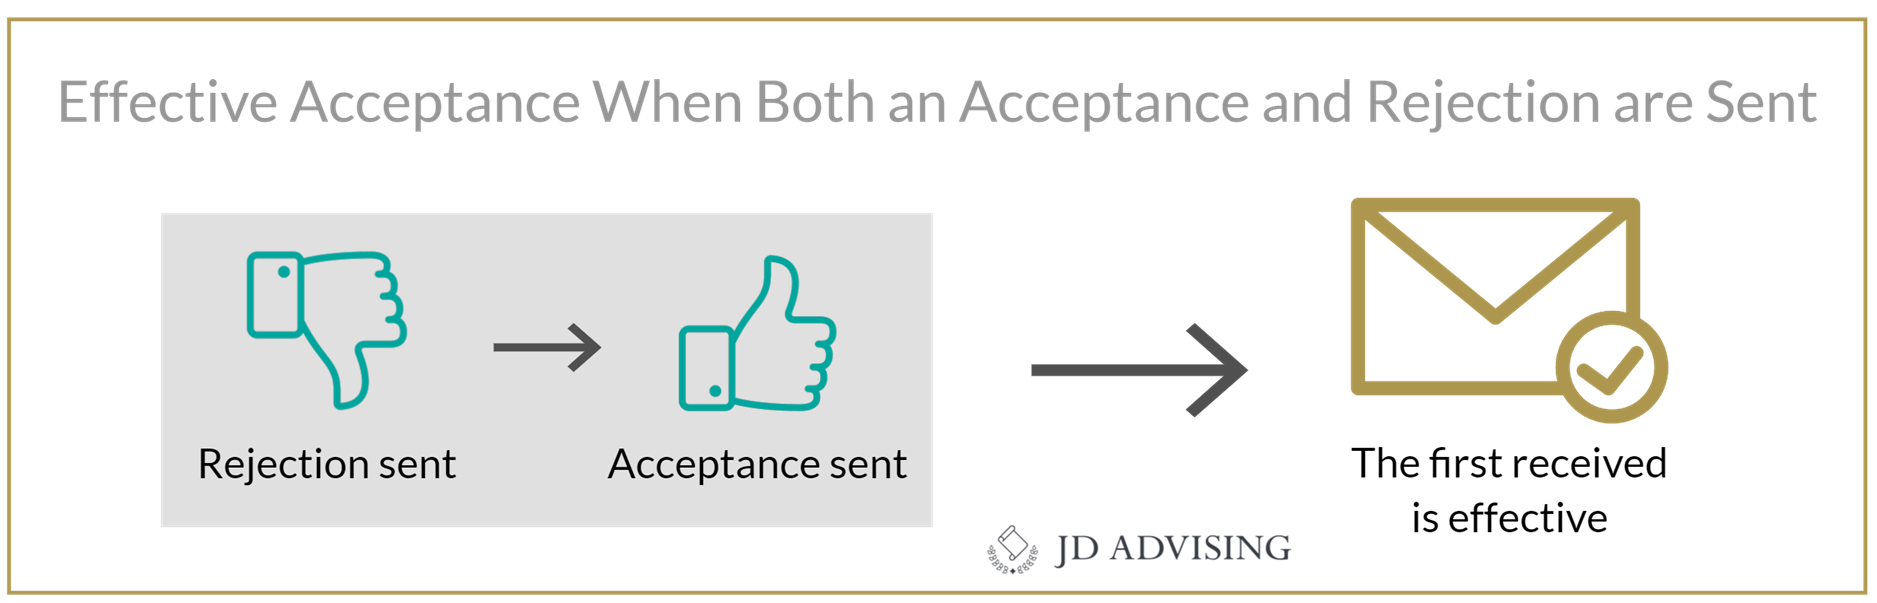 Effective Acceptance When Both an Acceptance and Rejection are Sent